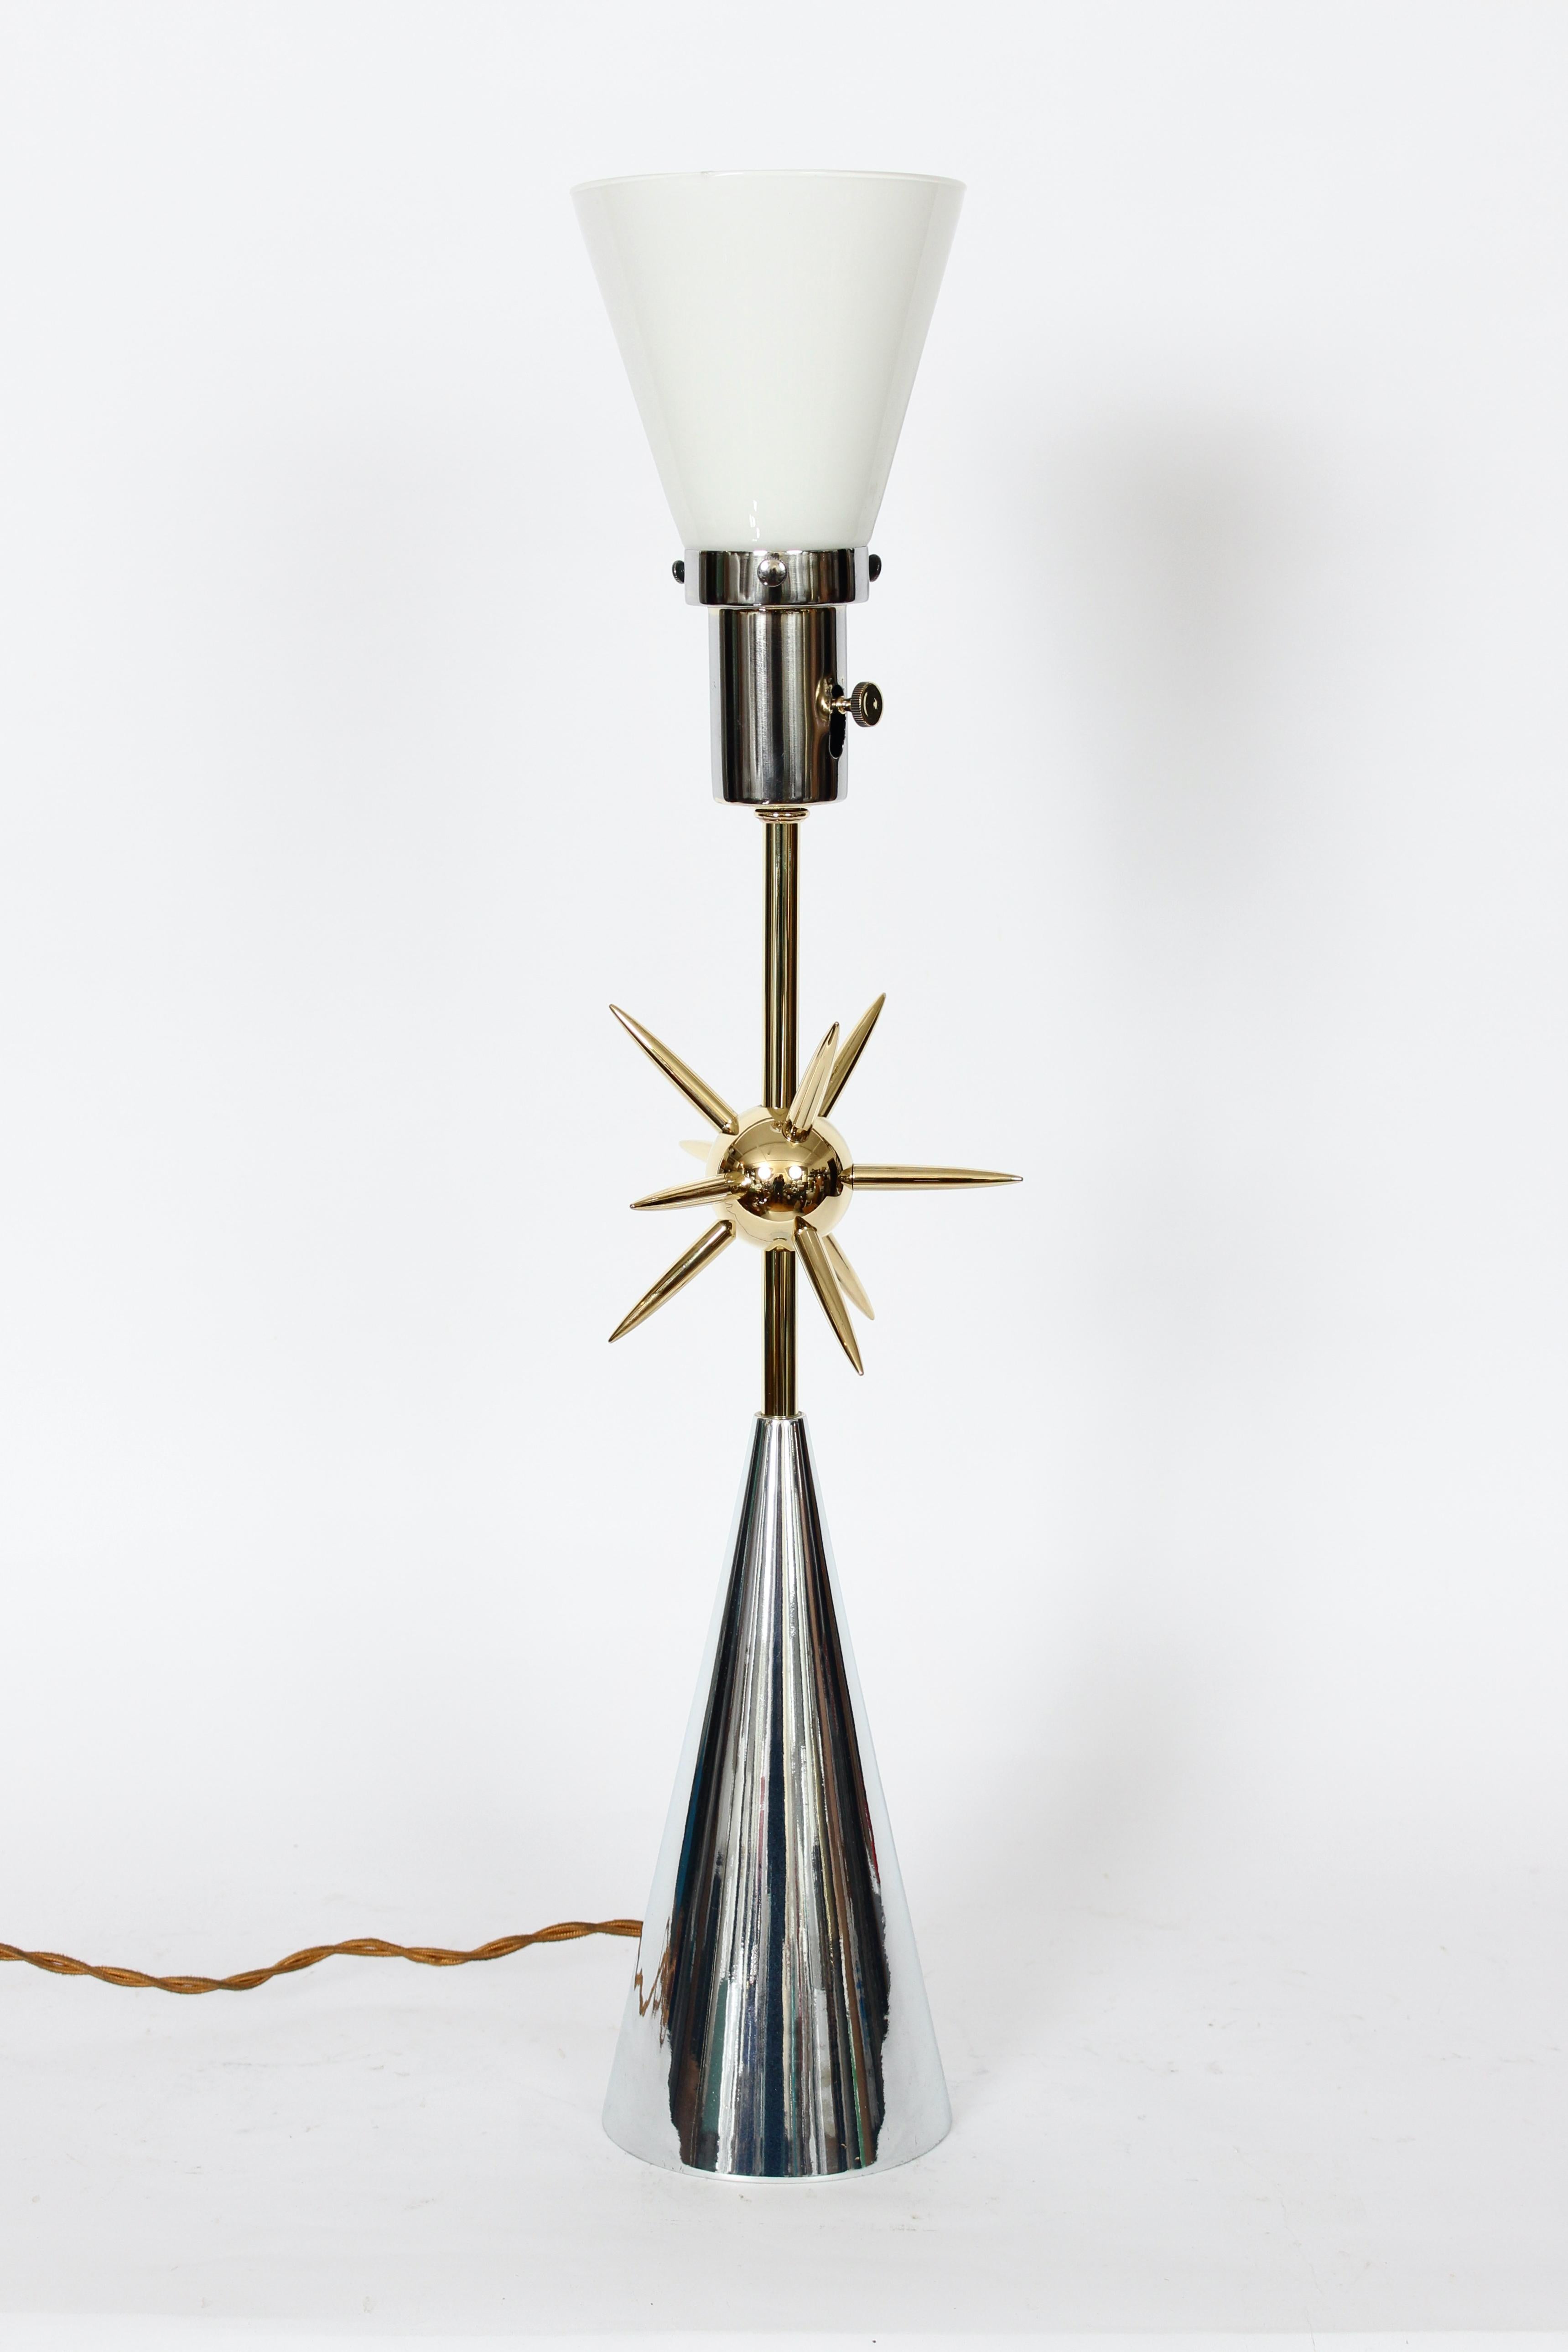 Vintage Mutual Sunset Lamp Co. Atomic Sputnik Polished Metals Table Lamp, 1950's In Good Condition For Sale In Bainbridge, NY